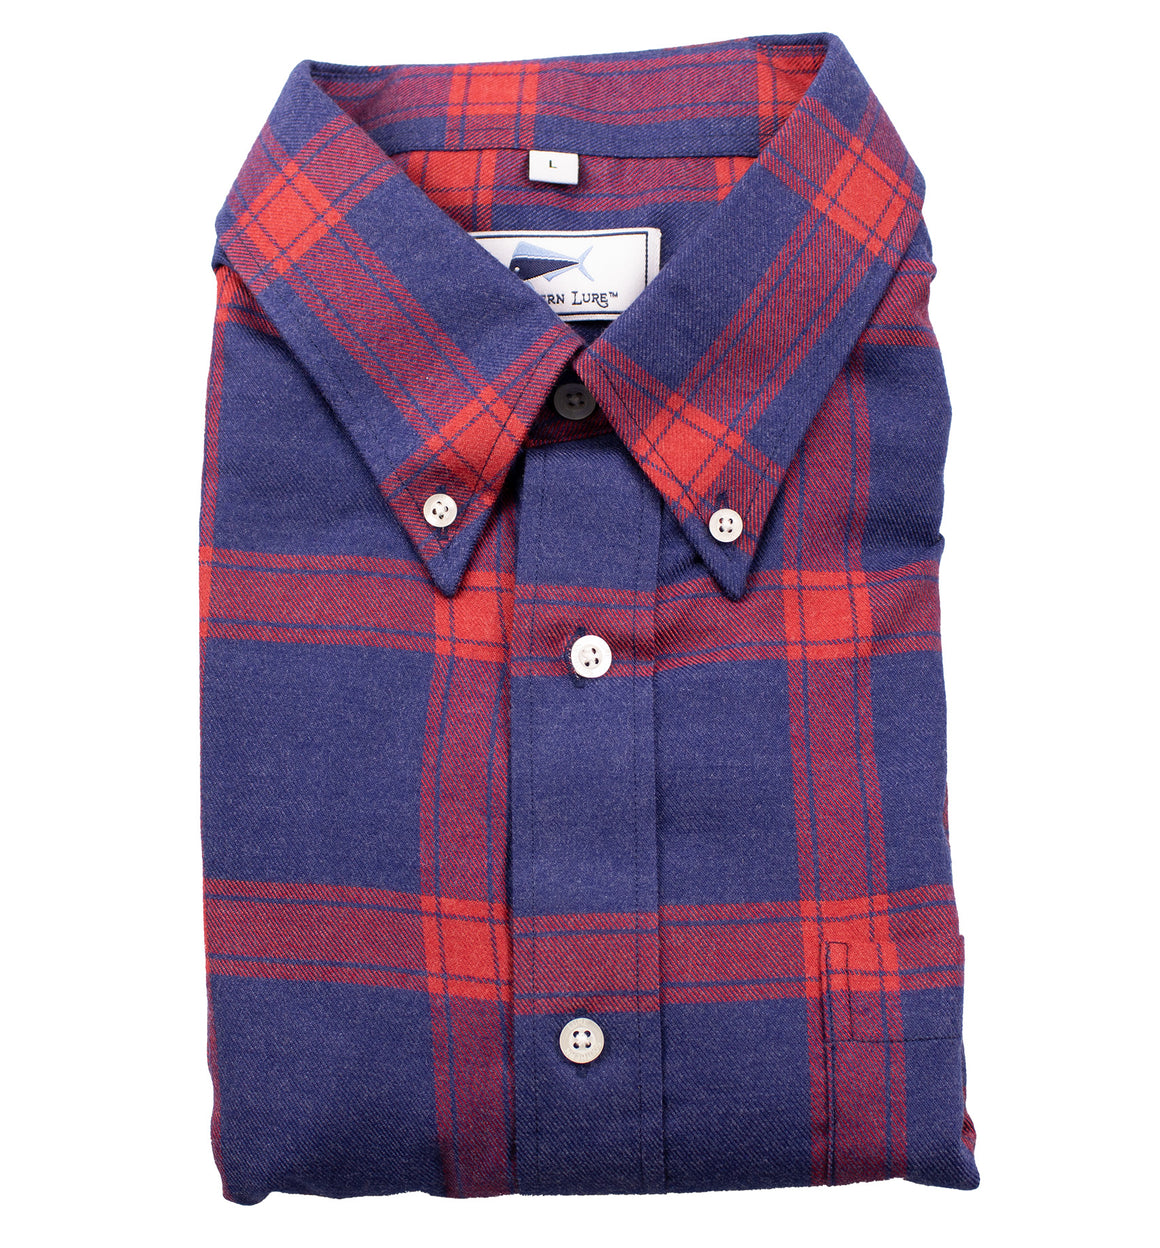 Youth & Toddler Flannel Shirt - Red Blue